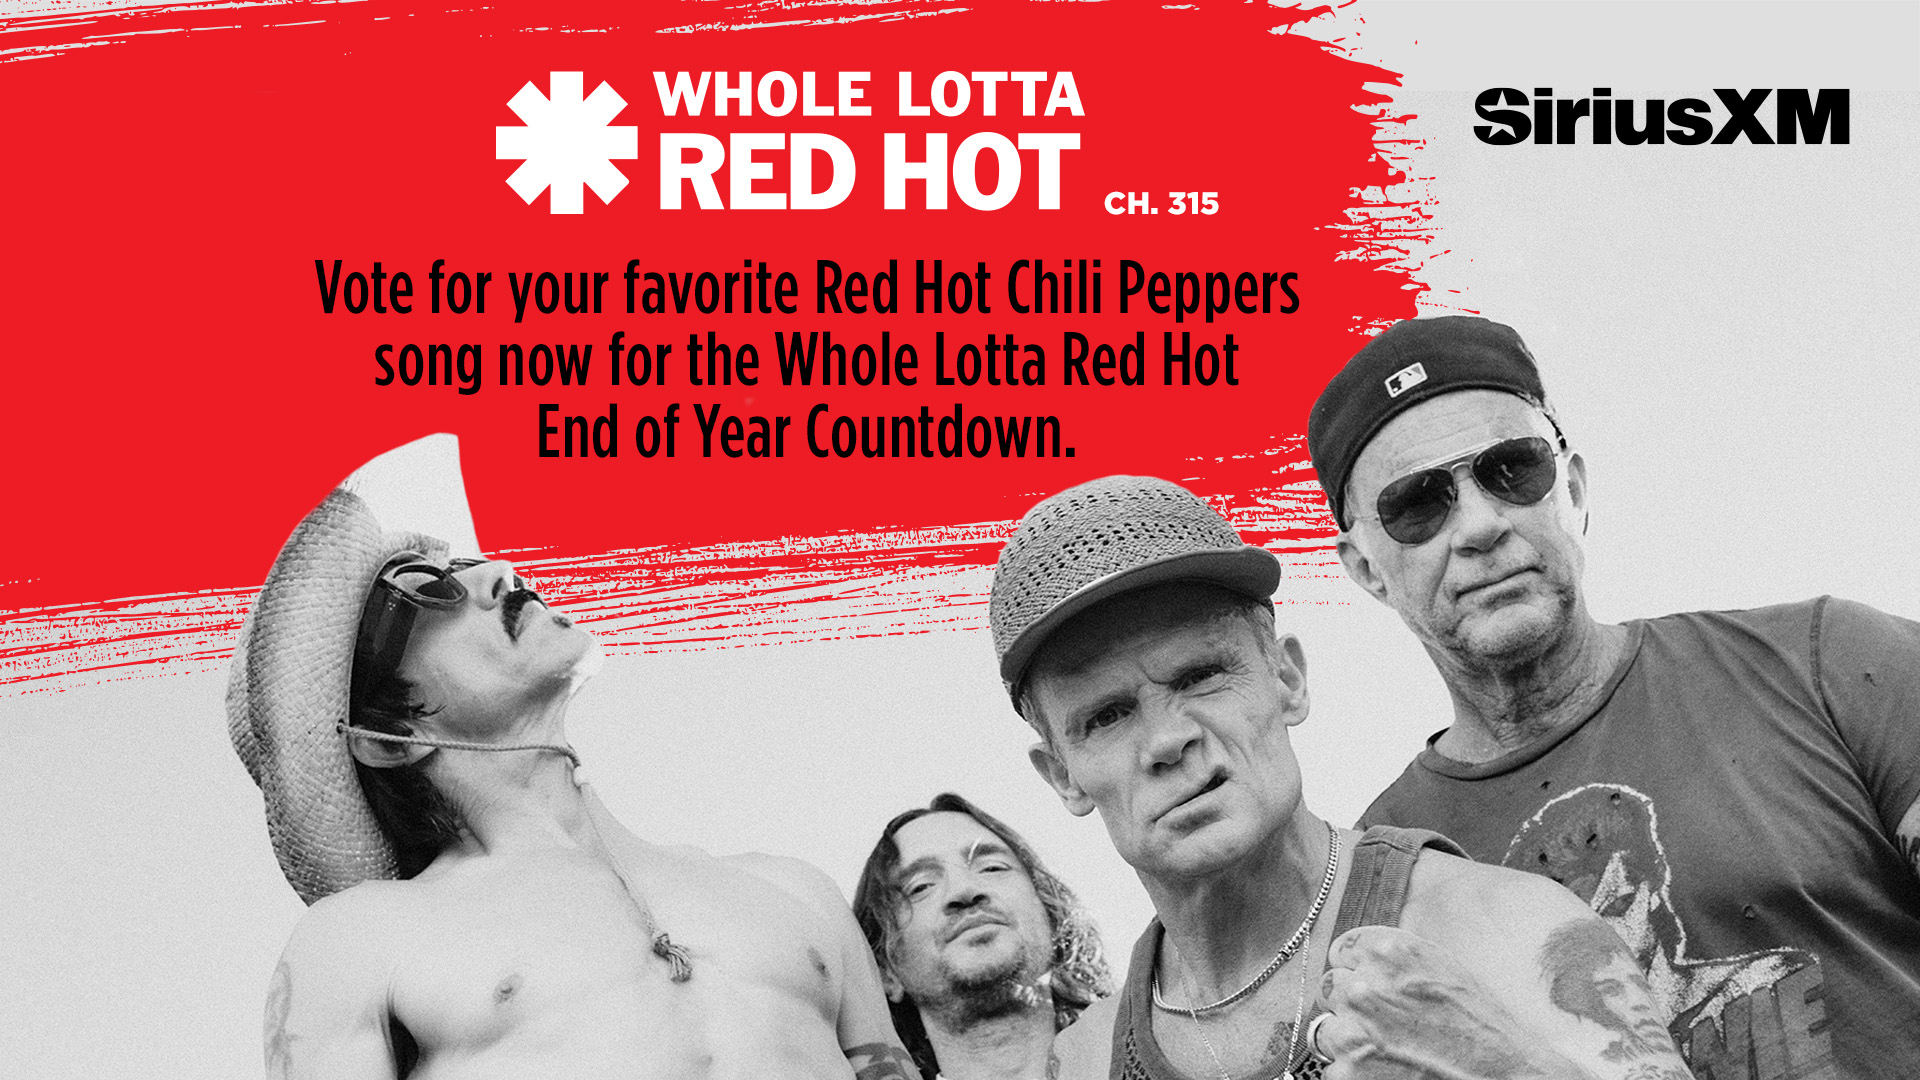 SiriusXM Whole Lotta Red Hot - Red Hot Chili Peppers End of Year Countdown